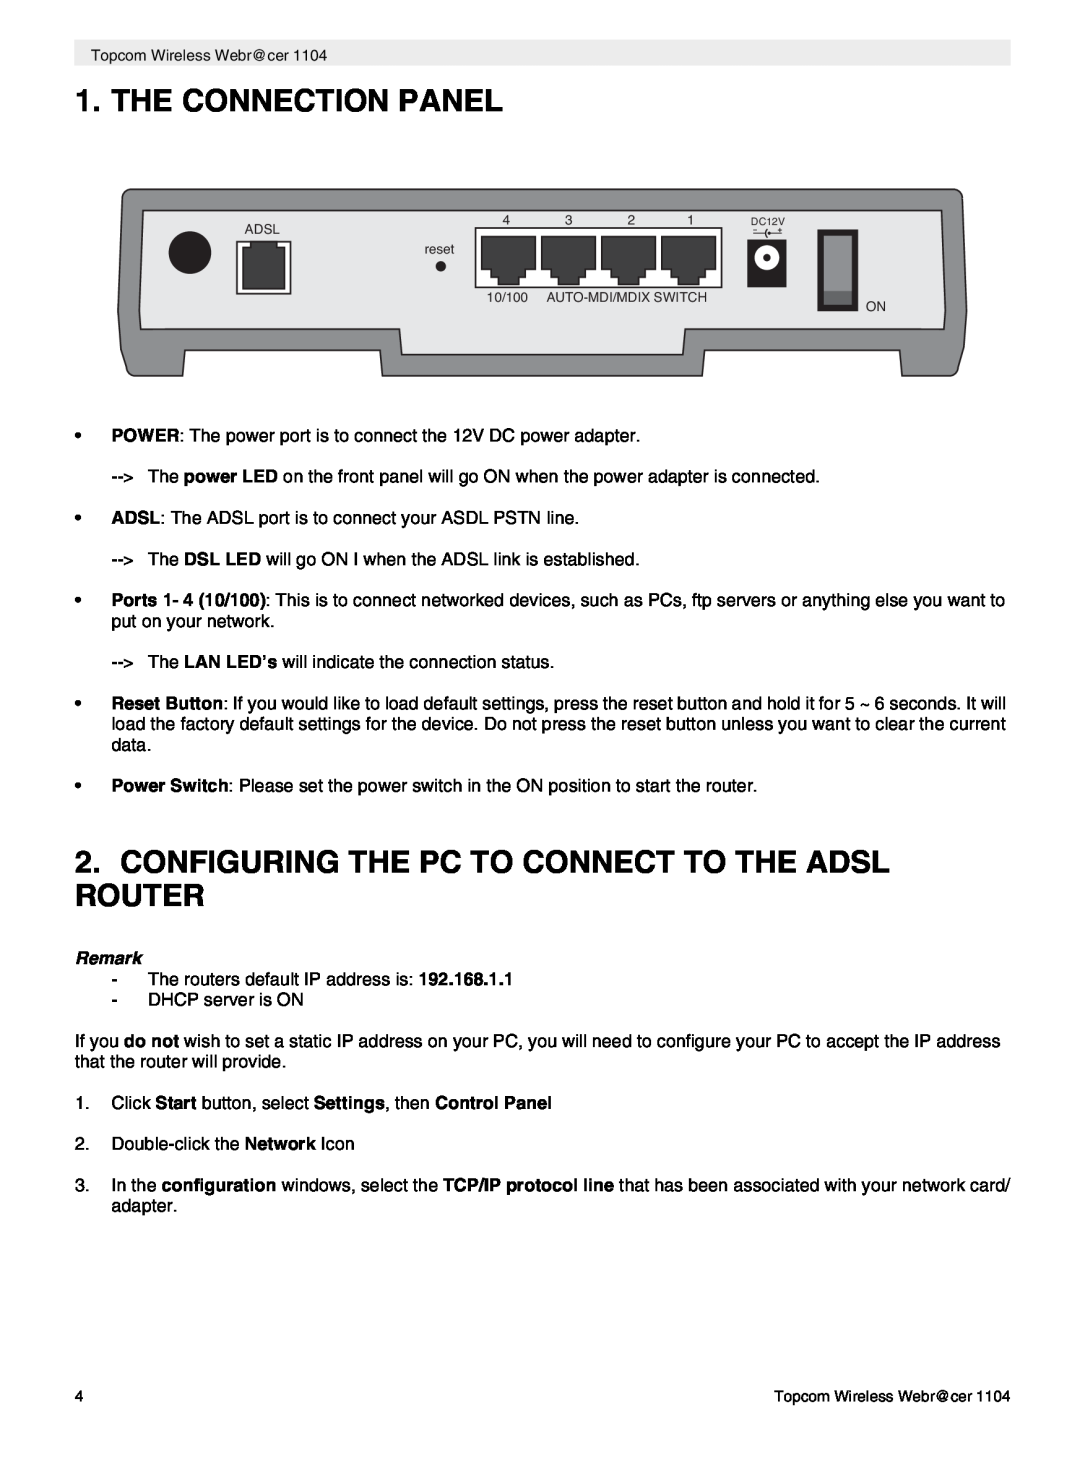 Topcom 1104 manual do utilizador The Connection Panel, Configuring The Pc To Connect To The Adsl Router, Remark 